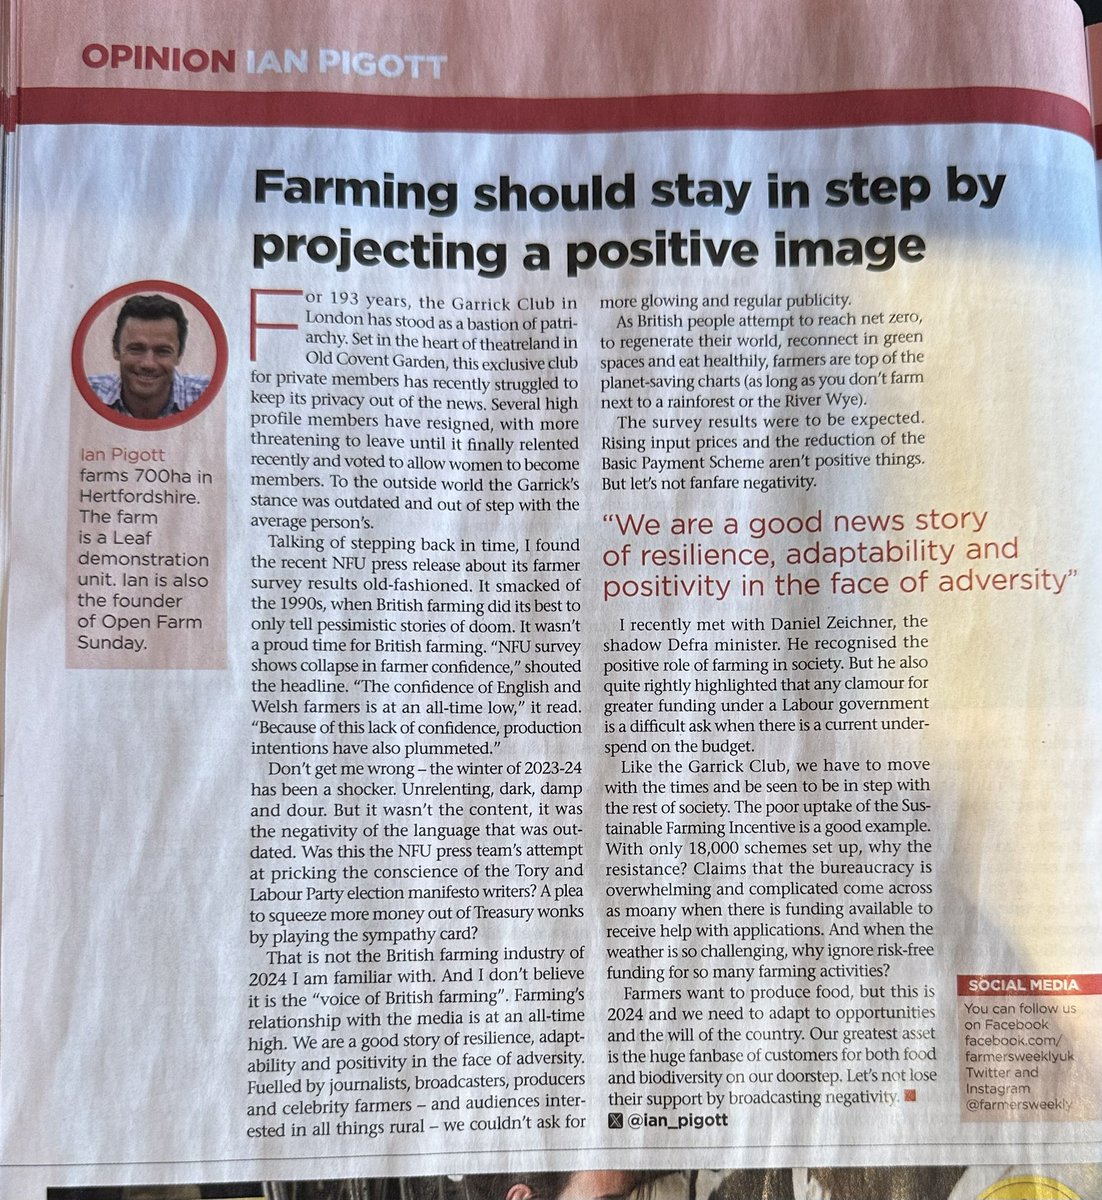 Really good opinion piece @ian_pigott in this week’s @FarmersWeekly “Farmers want to produce food but this is 2024 & we need to adapt to opportunities & the will of the country” If we want an increased budget we need to demonstrate the value of all the public goods we can provide